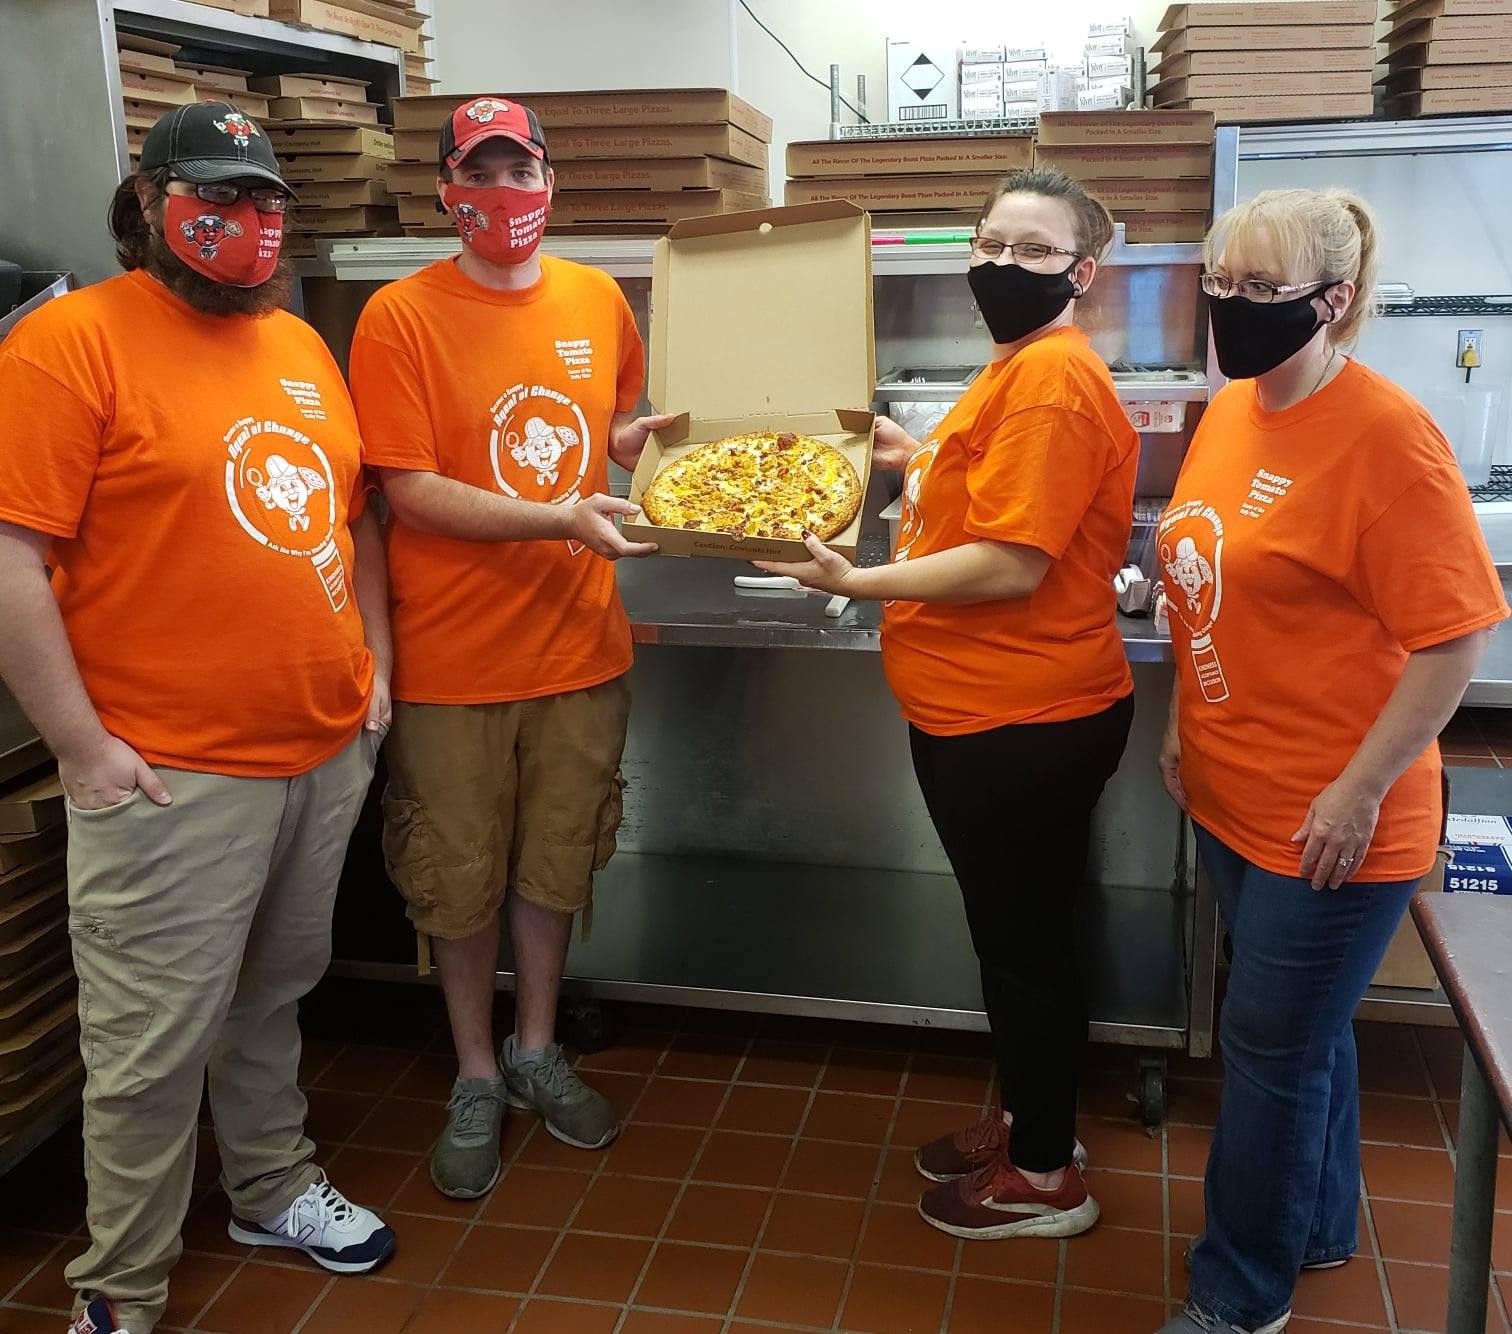 Agent of Change - Unity Pizza 2020
Snappy Tomato Pizza - Corporate Offices - Call 859.525.4680 - Online Menu - Carryout and Delivery
"Add Cheddar and Make It Better!" 
TEAM PICTURE IN ORANGE SHIRTS